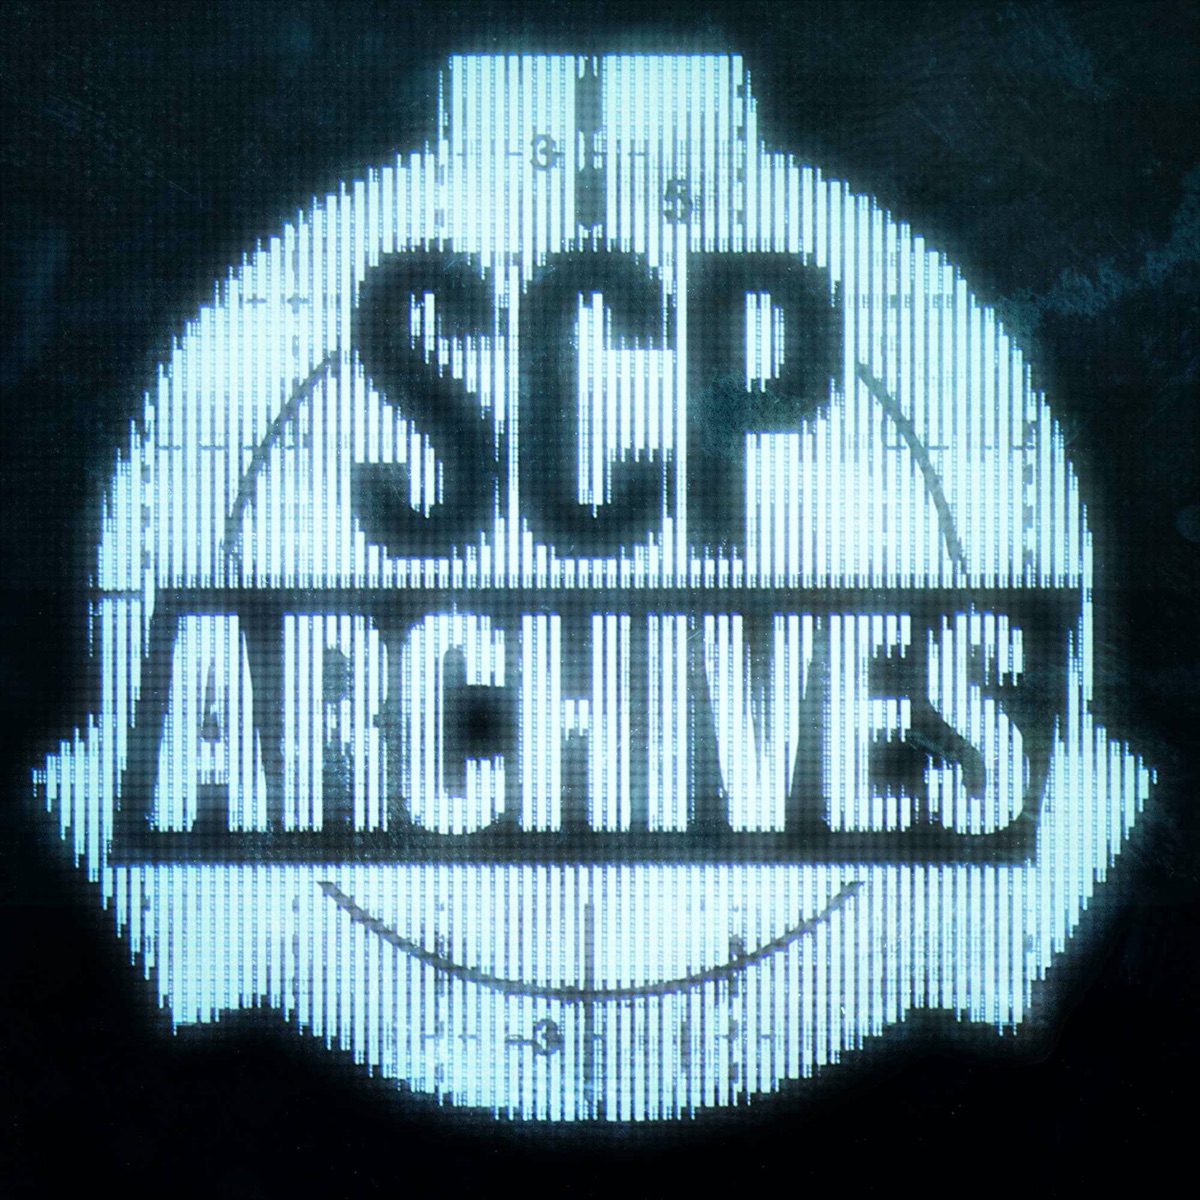 SCP-6373 - SCP Foundation